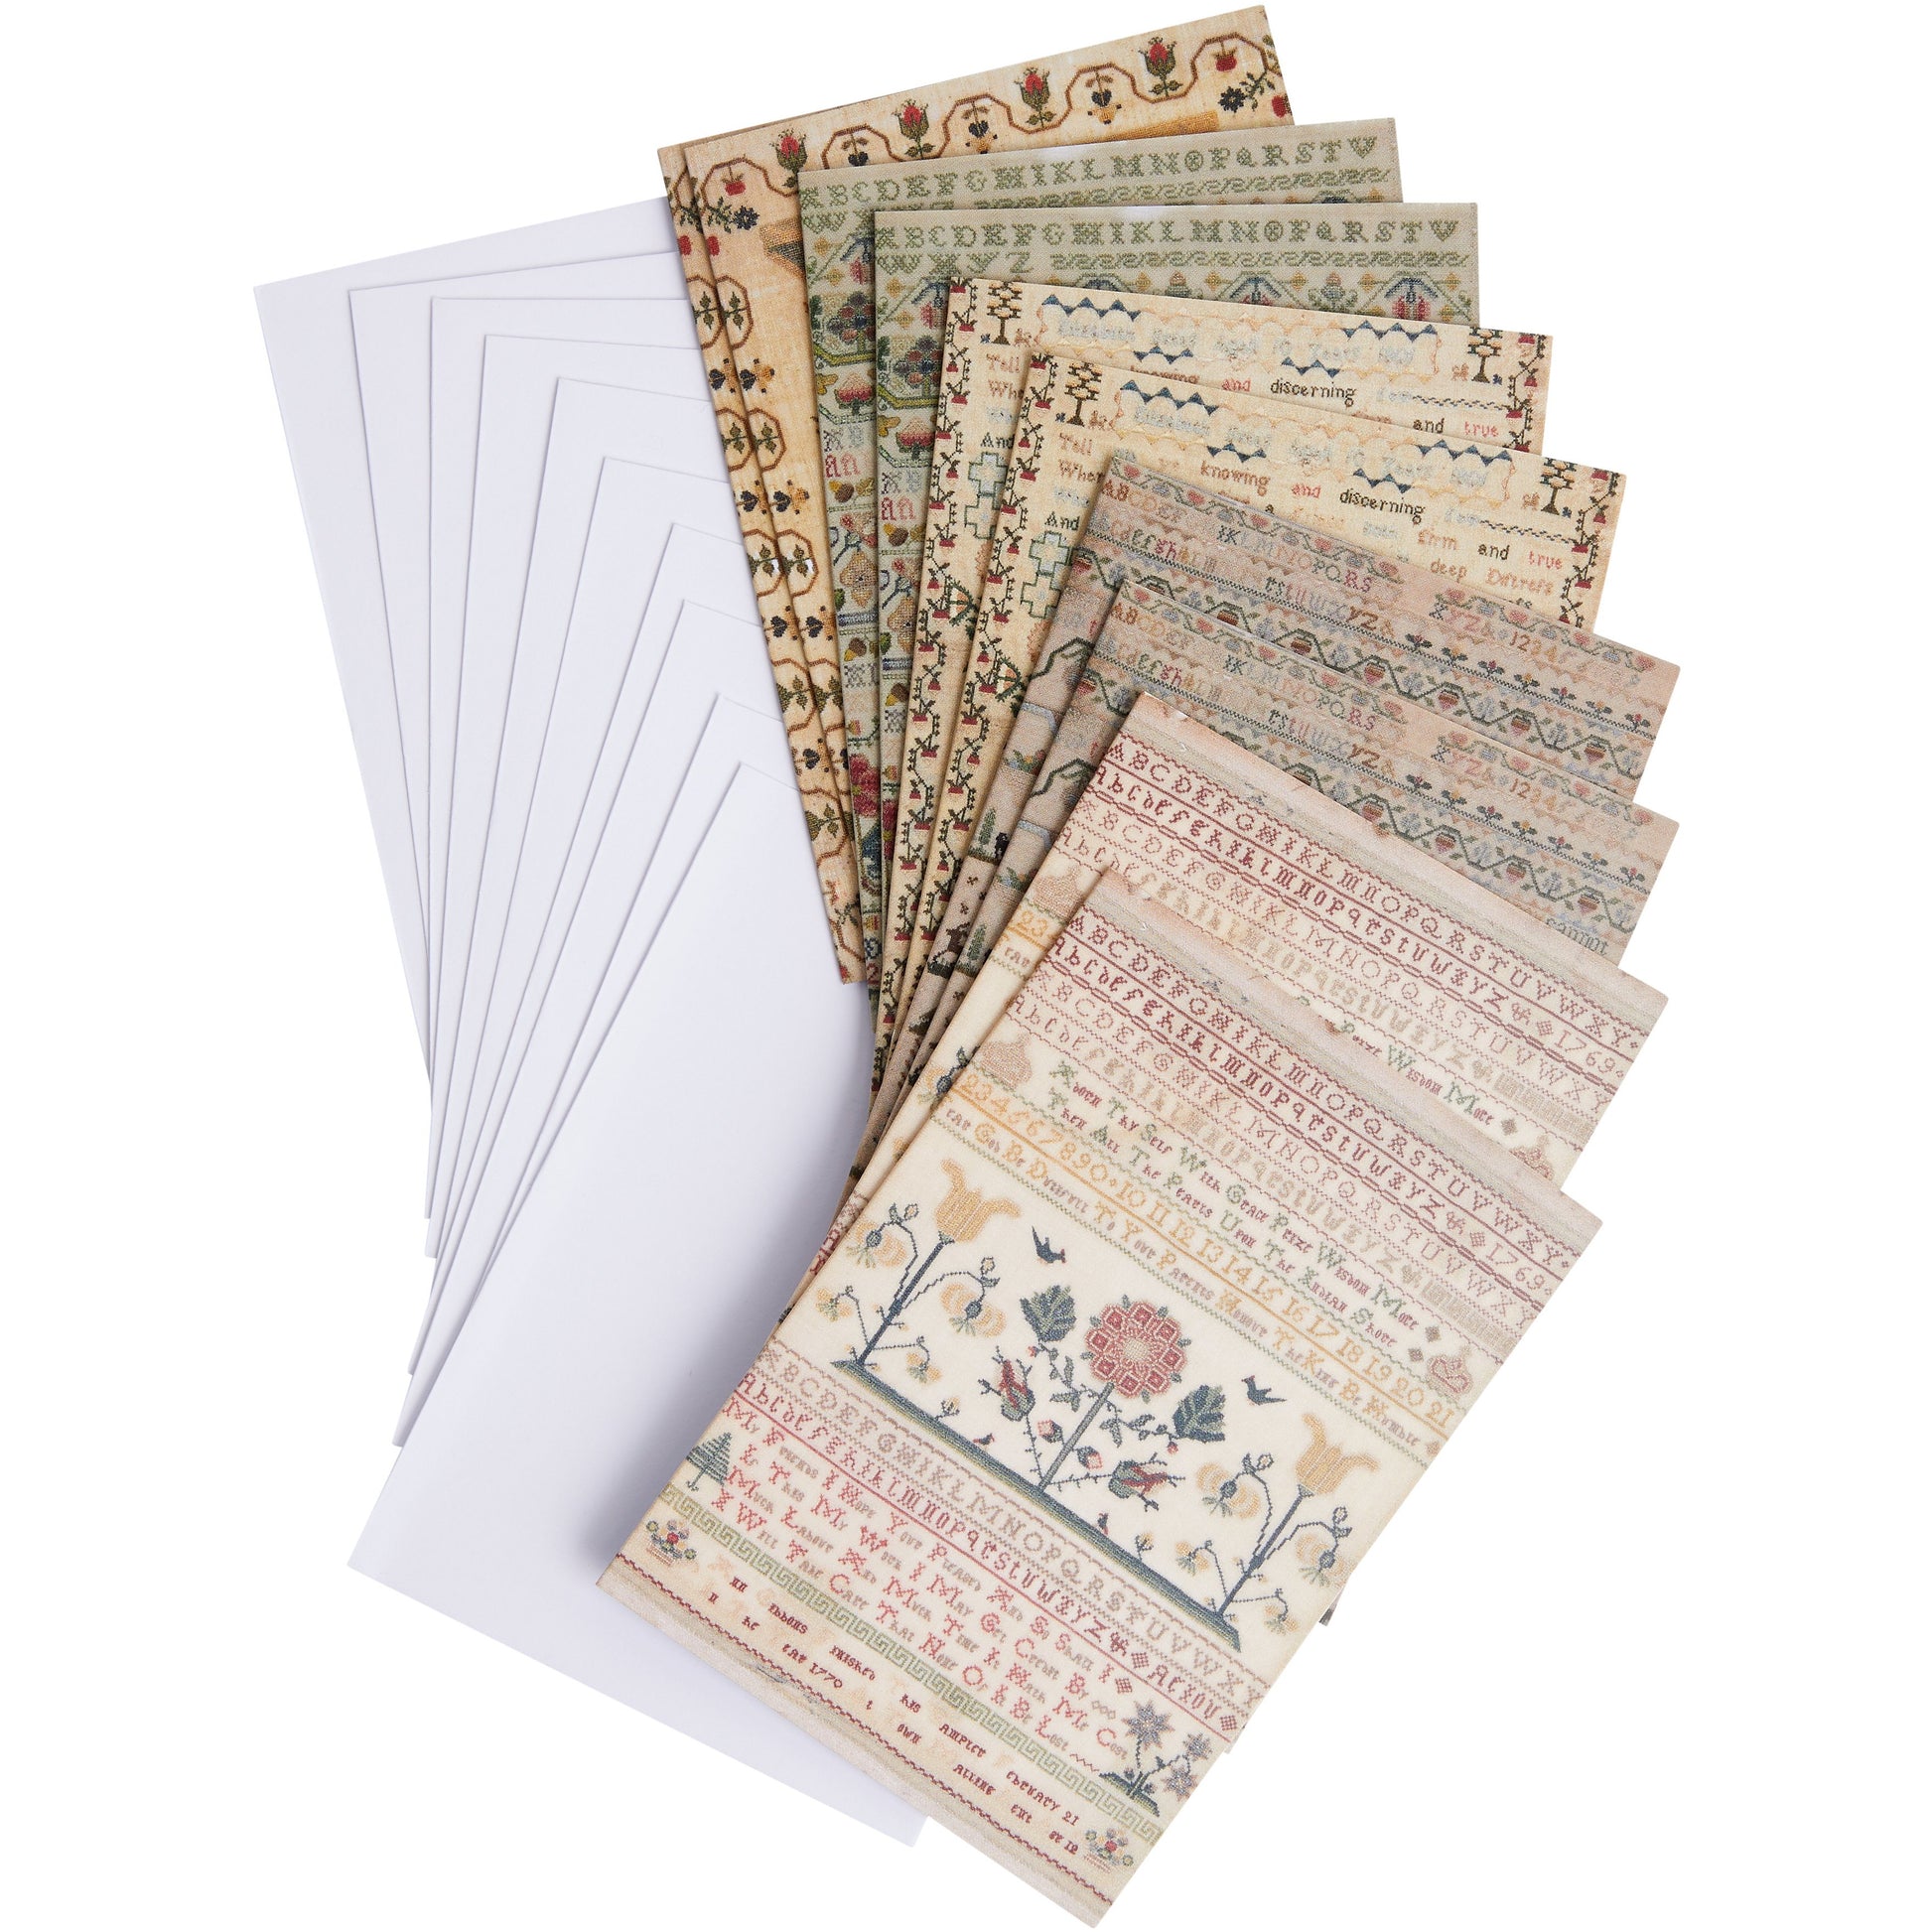 10 notelets with sampler designs from The Fitzwilliam Museum. With envelopes. Brought to you by CuratingCambridge.com